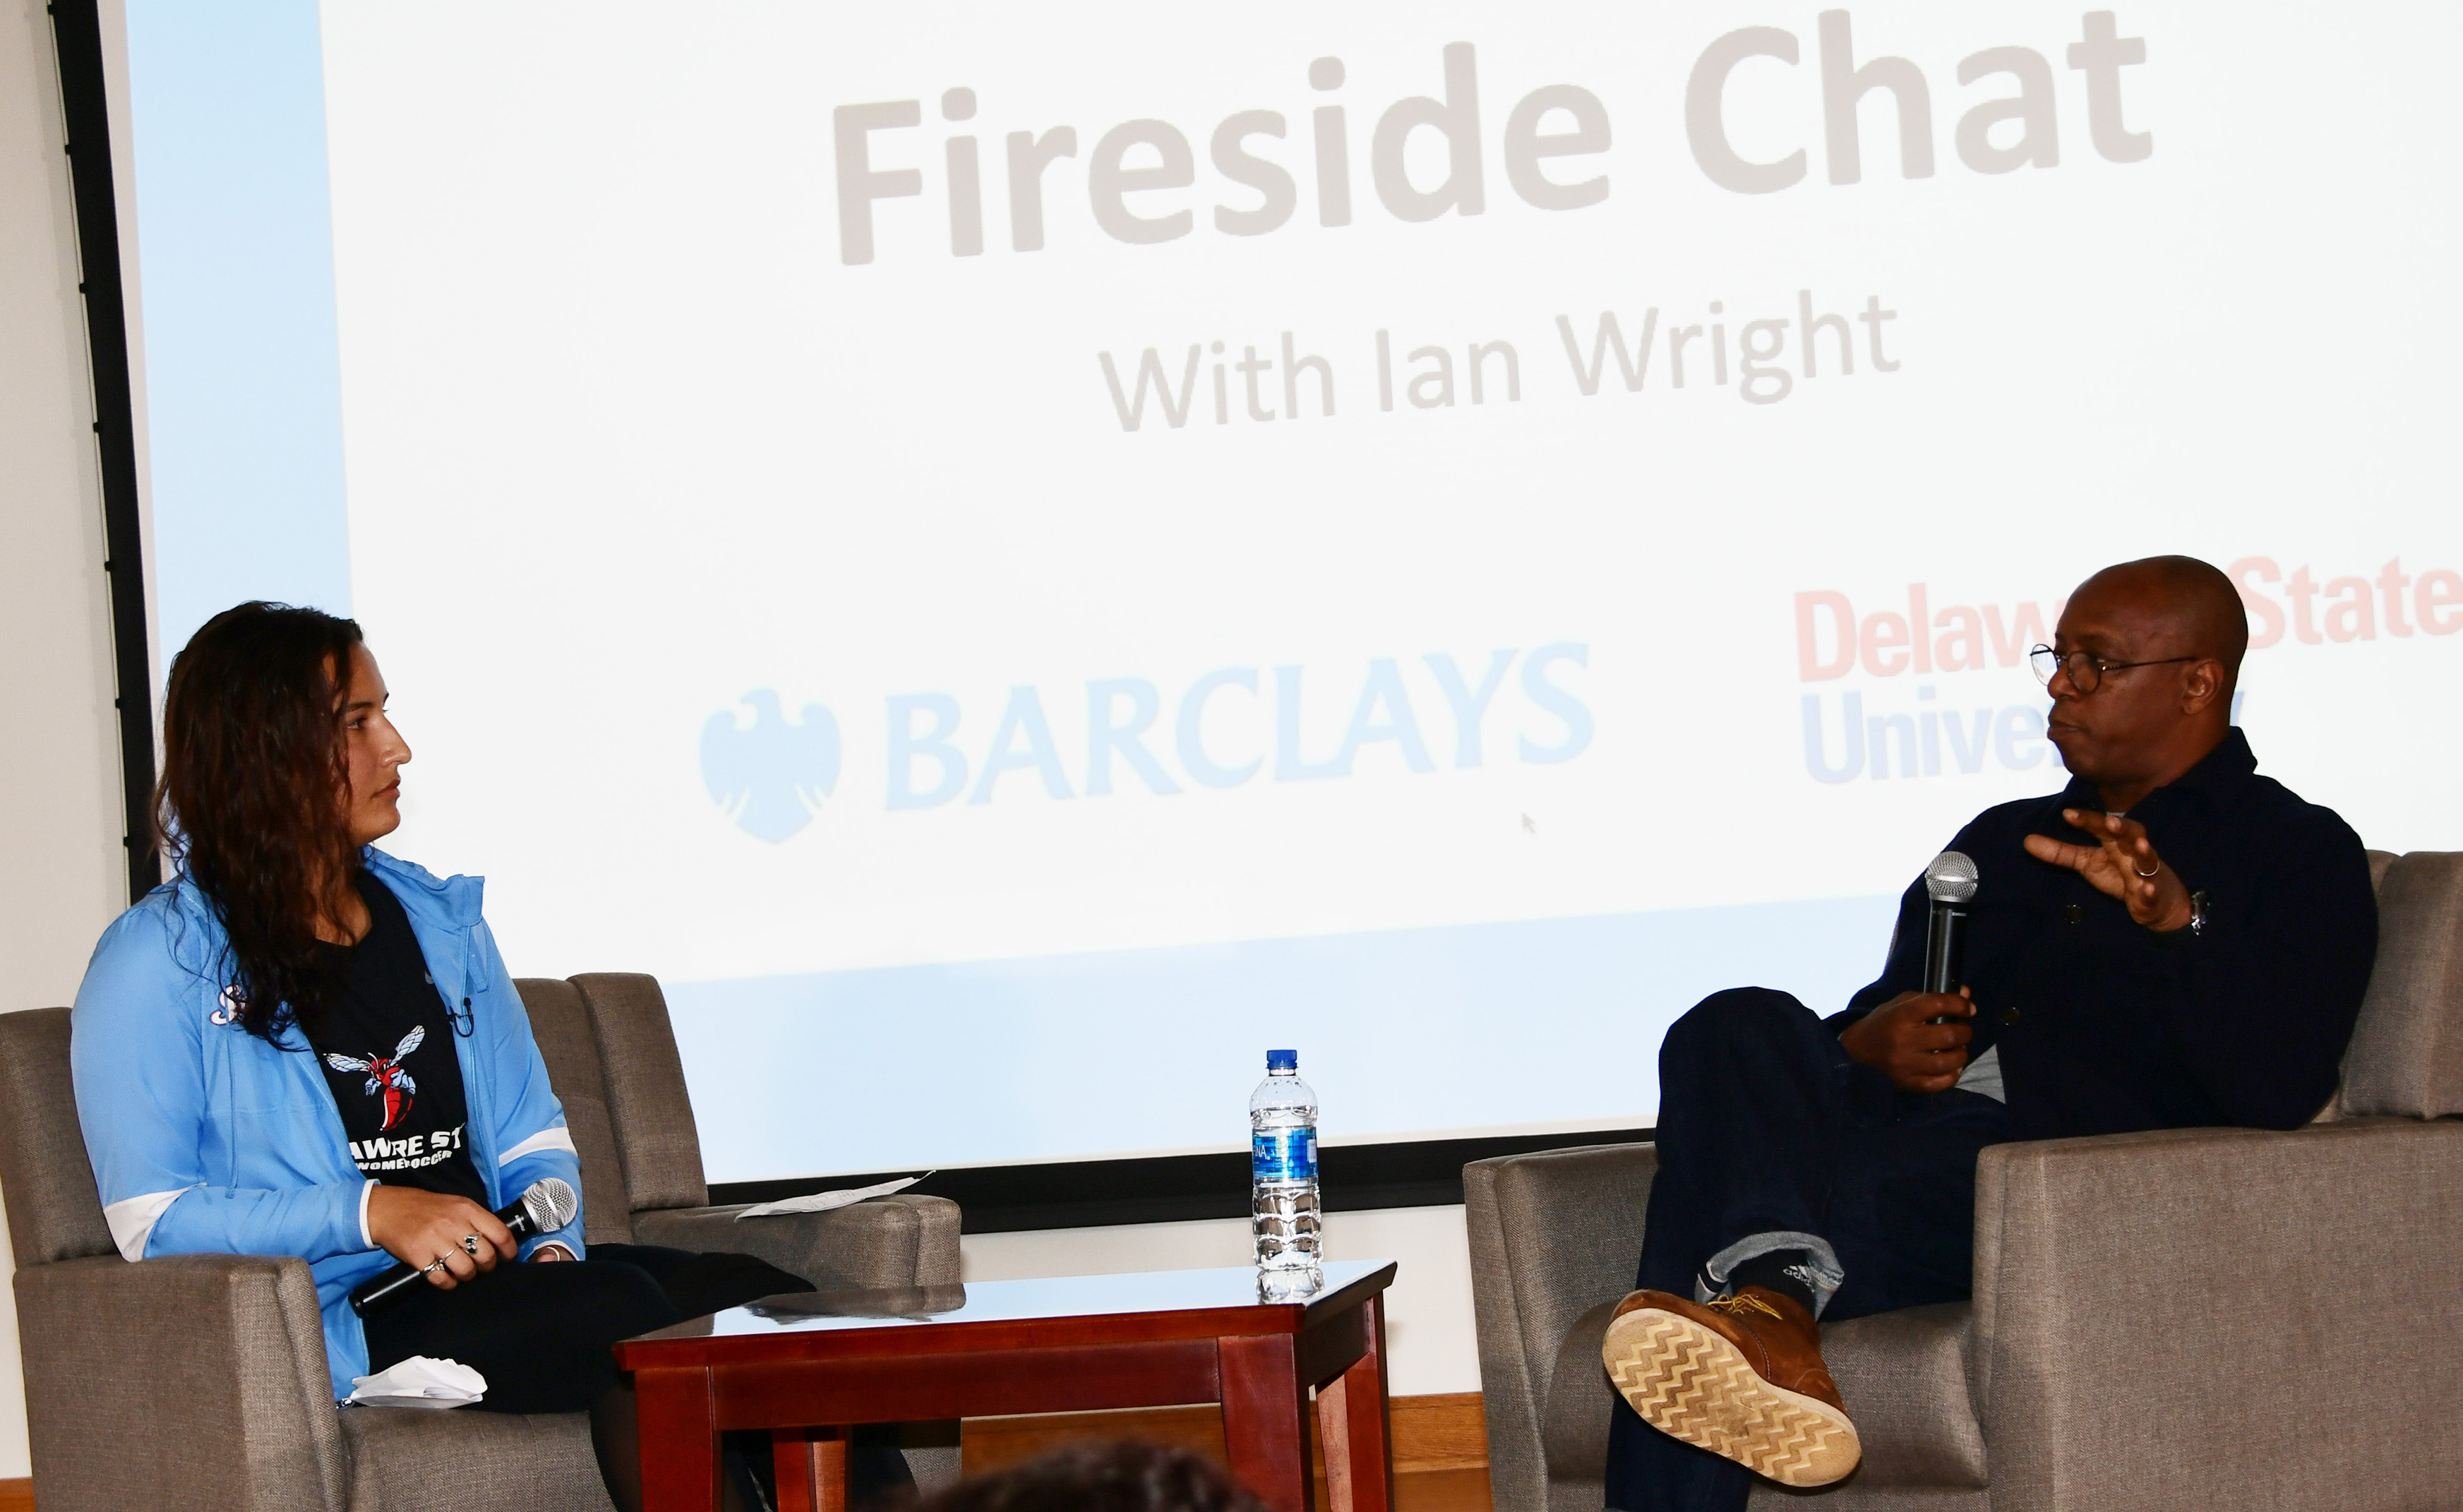 Iriona Shabani, senior Lady Hornet soccer member conducted the "fireside chat" with English soccer star Ian Wright.